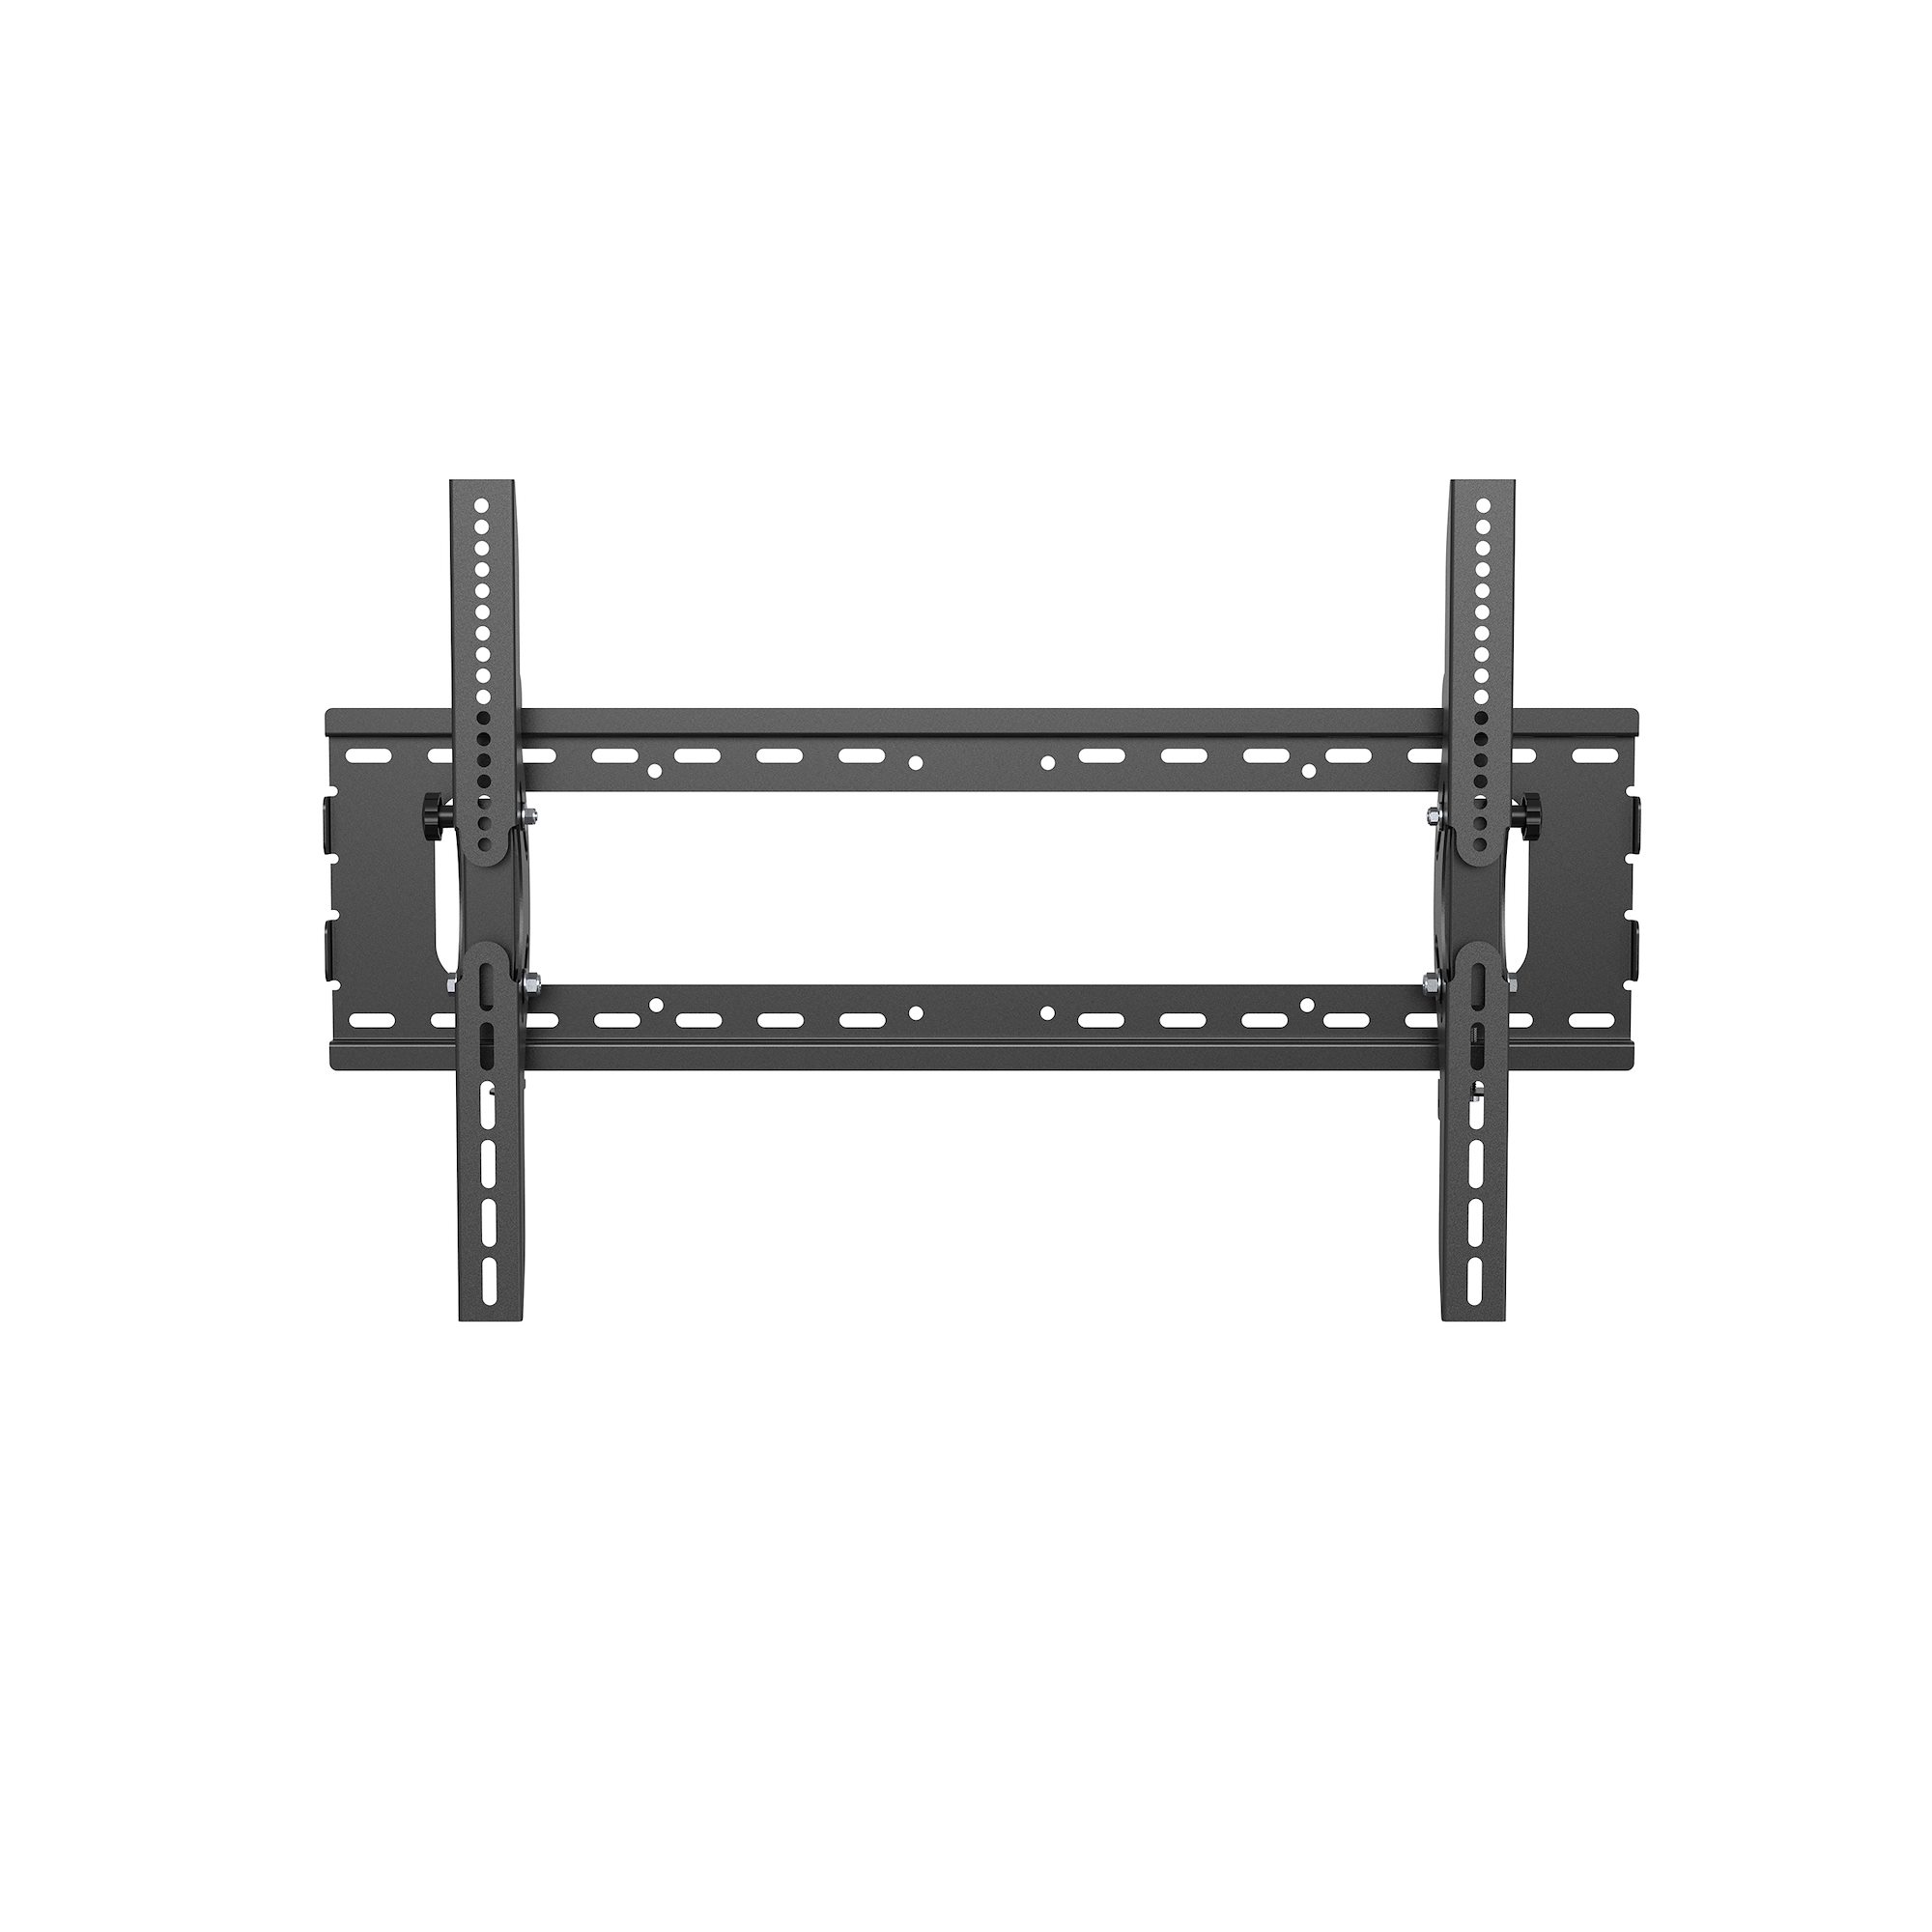 Support mural pour écran plat Mywall Support mural TV My Wall HP32L 127,0 cm  (50) - 254,0 cm (100) rigide